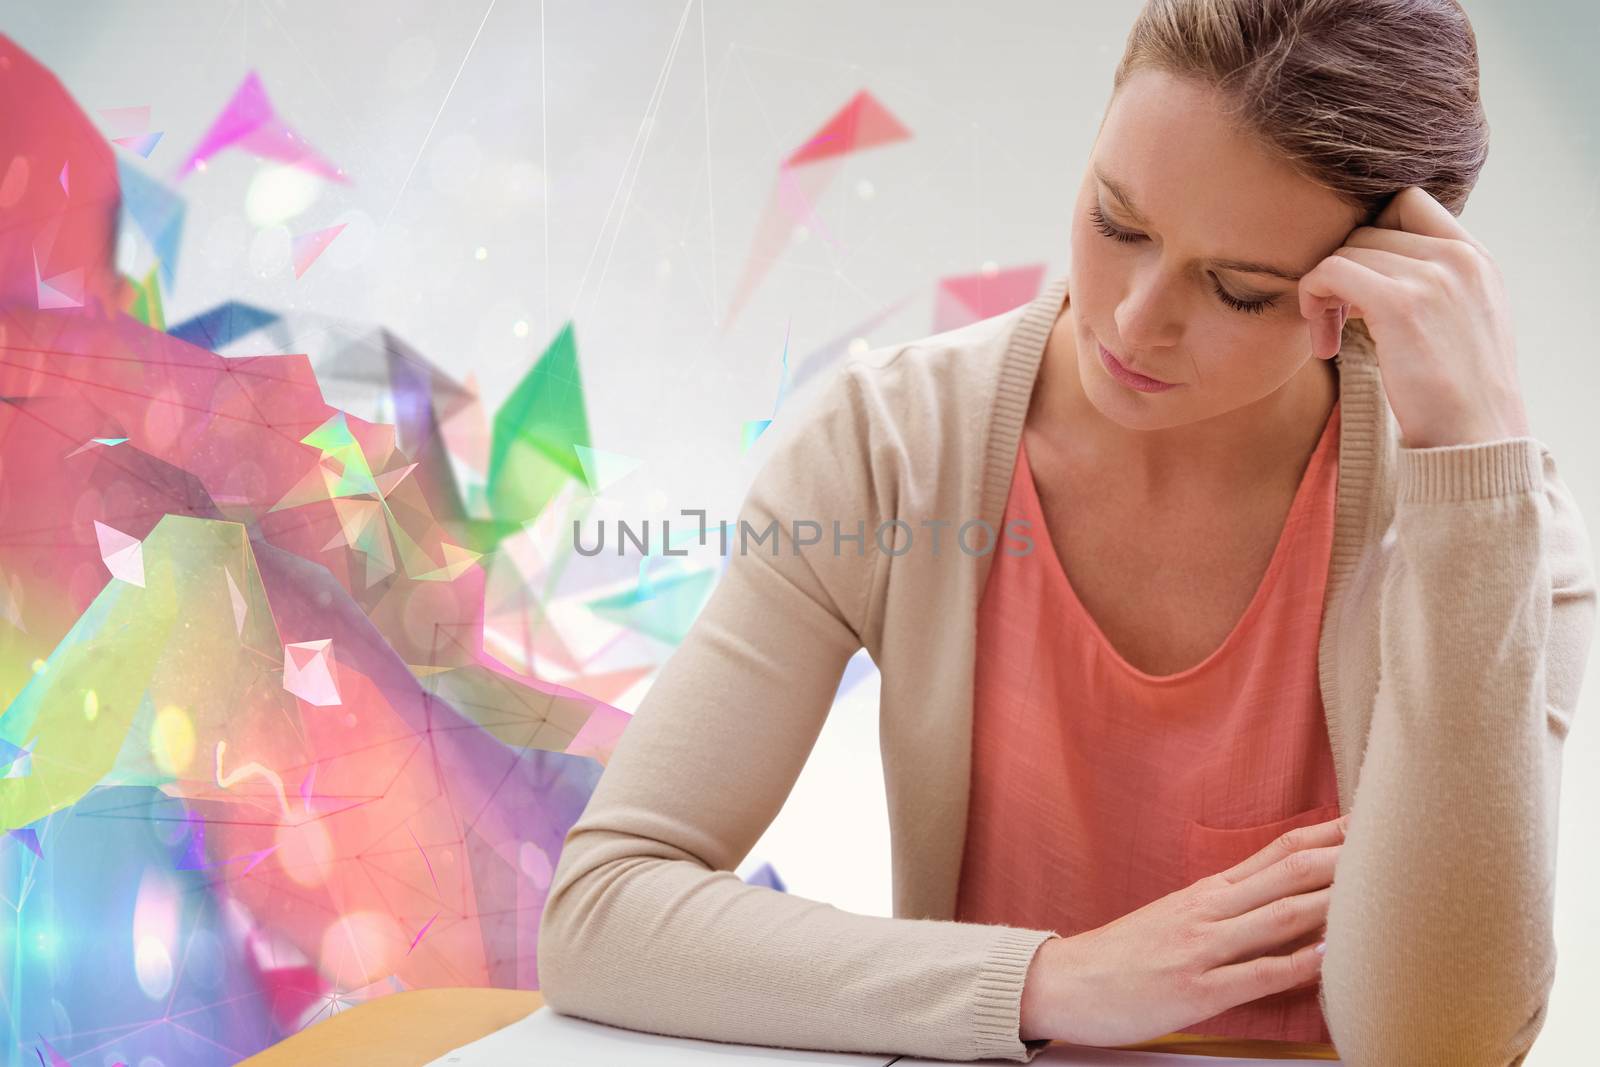 Student studying against colourful abstract design